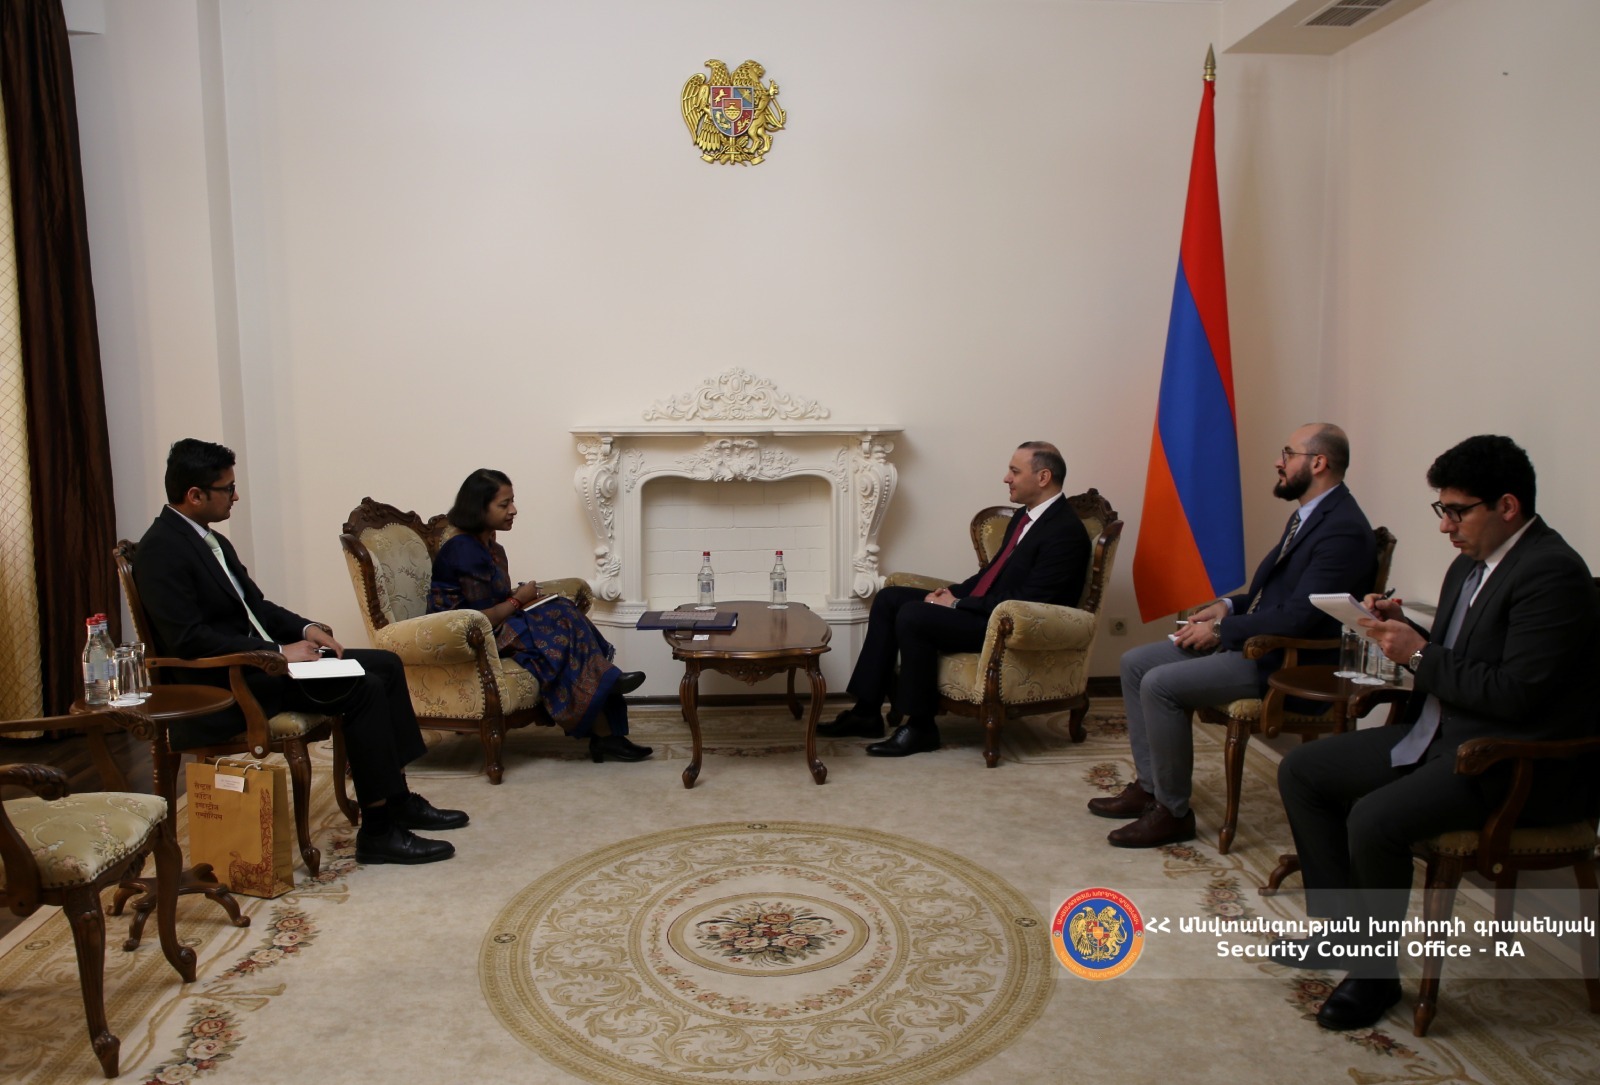 Armen Grigoryan: The agenda of Armenian-Indian cooperation has expanded in recent years, including almost all areas of bilateral interest